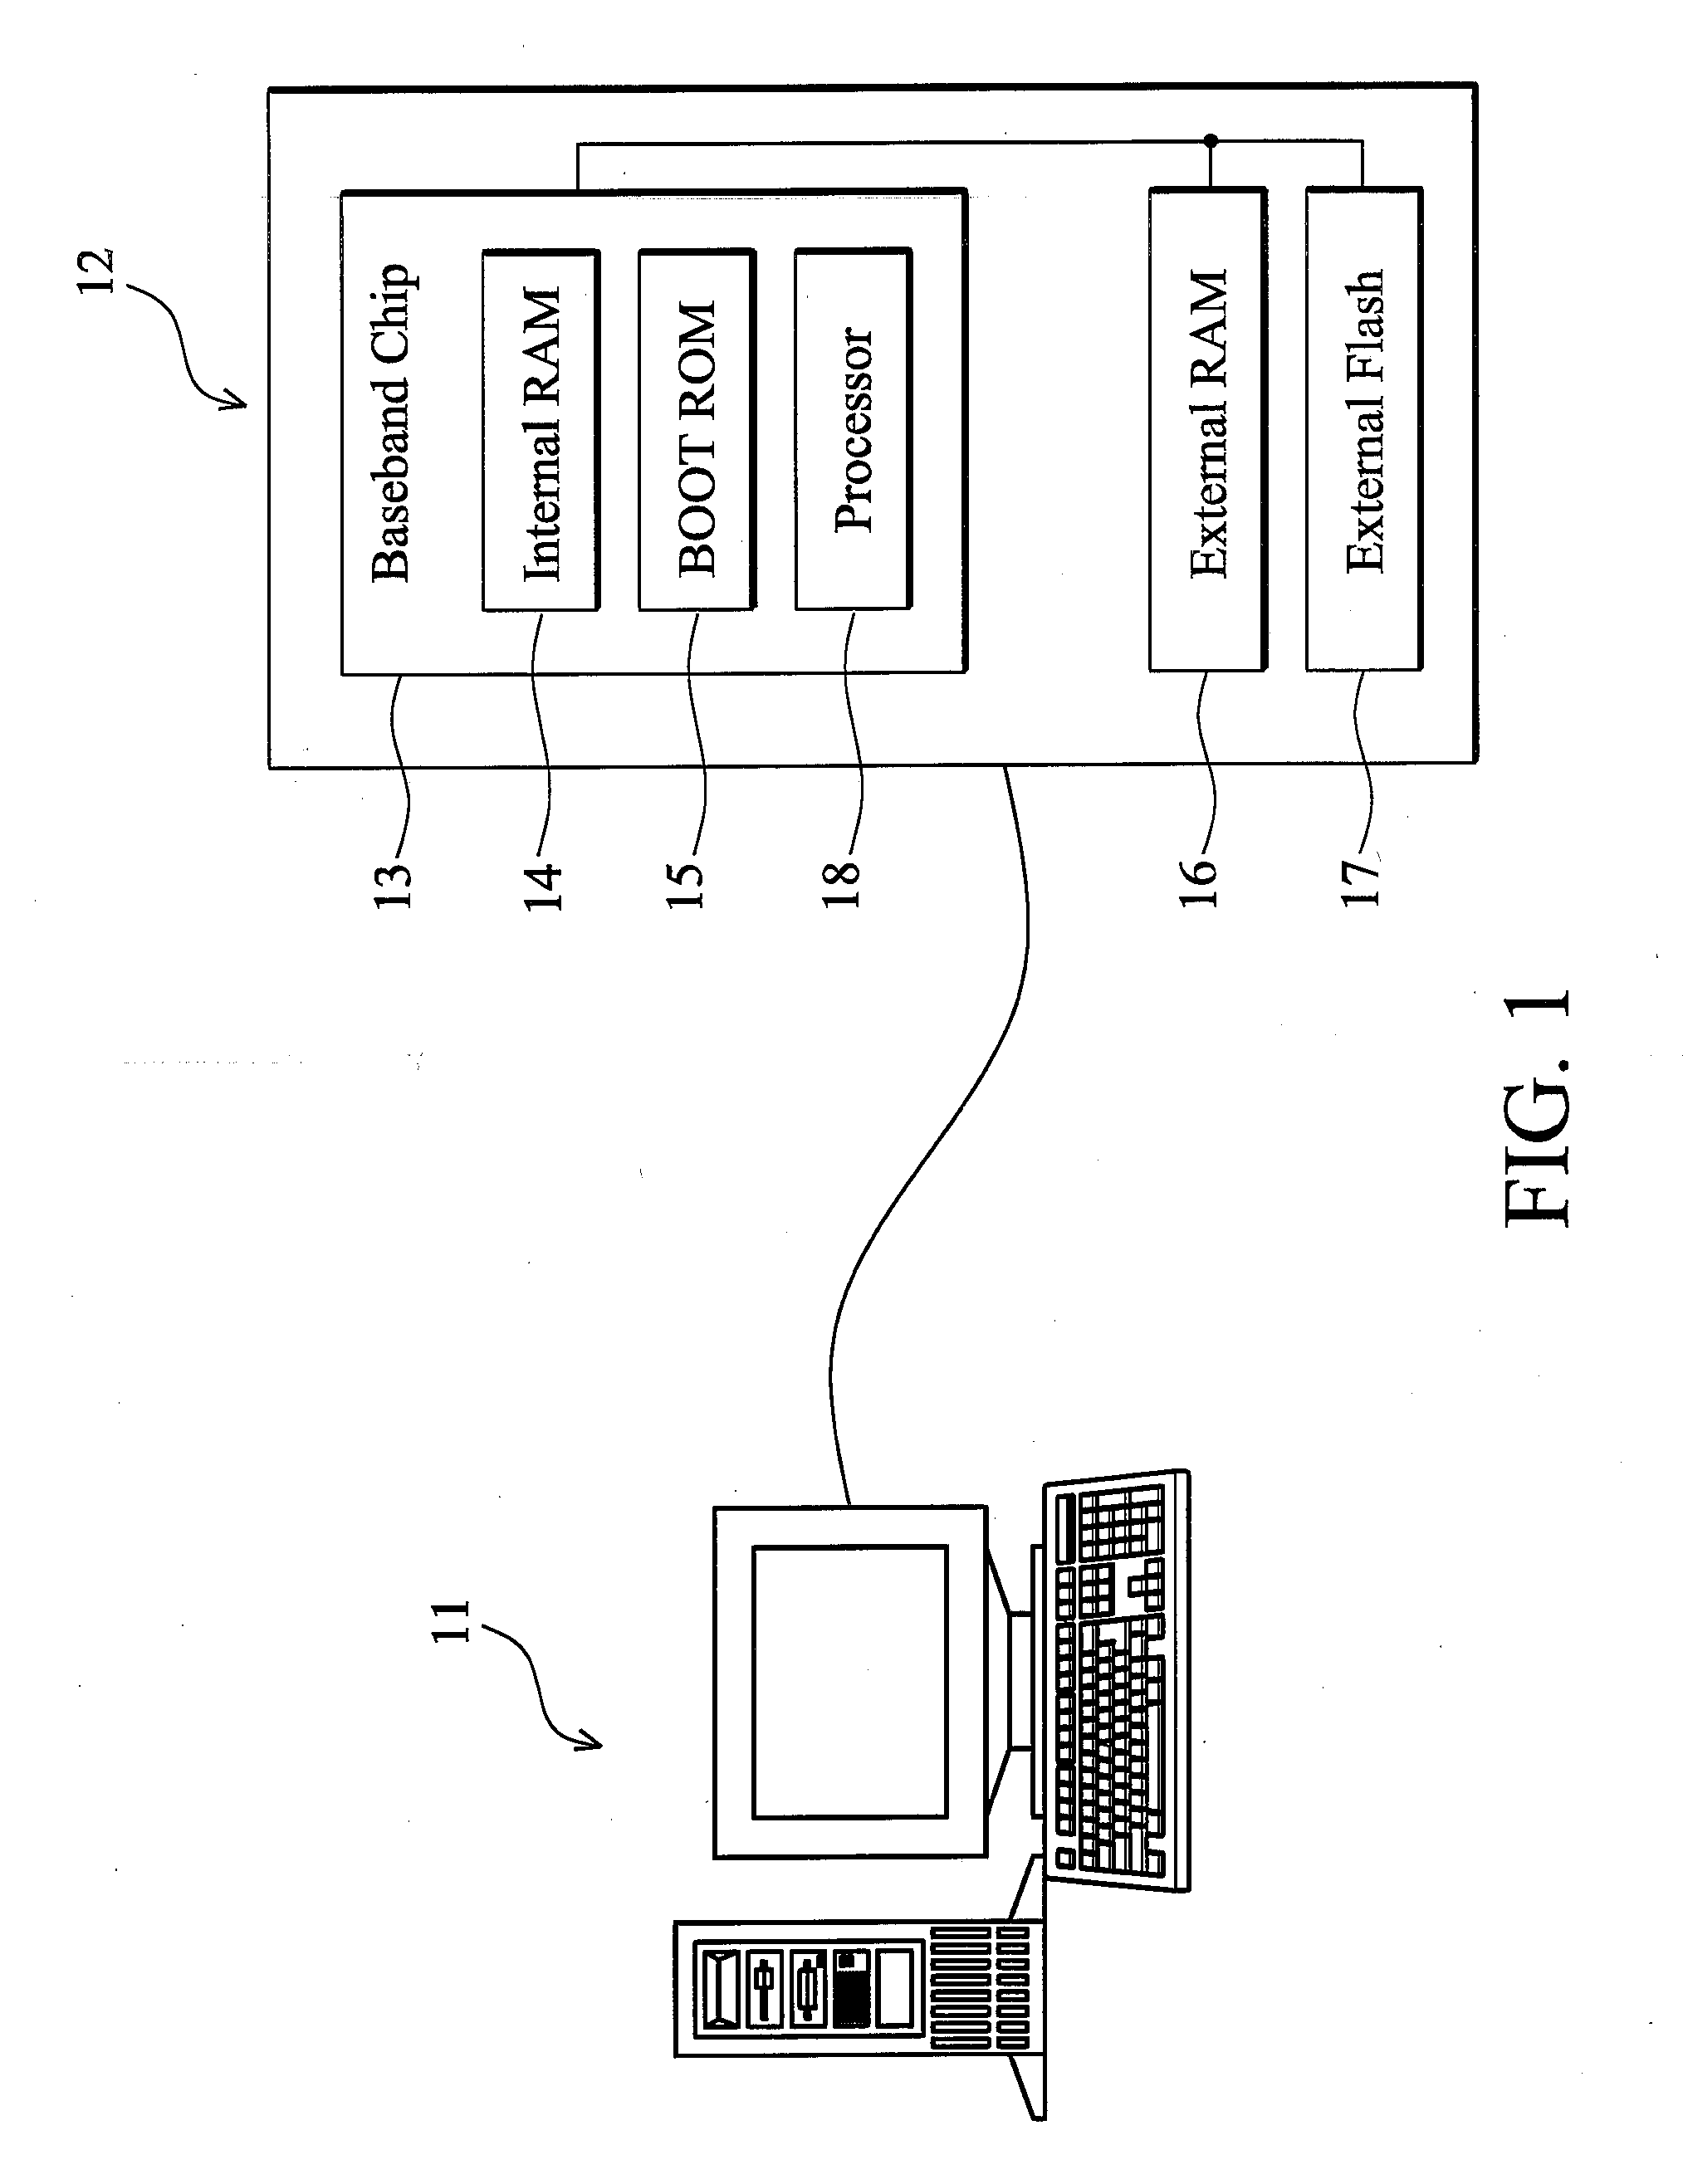 Methods for program verification and apparatuses using the same